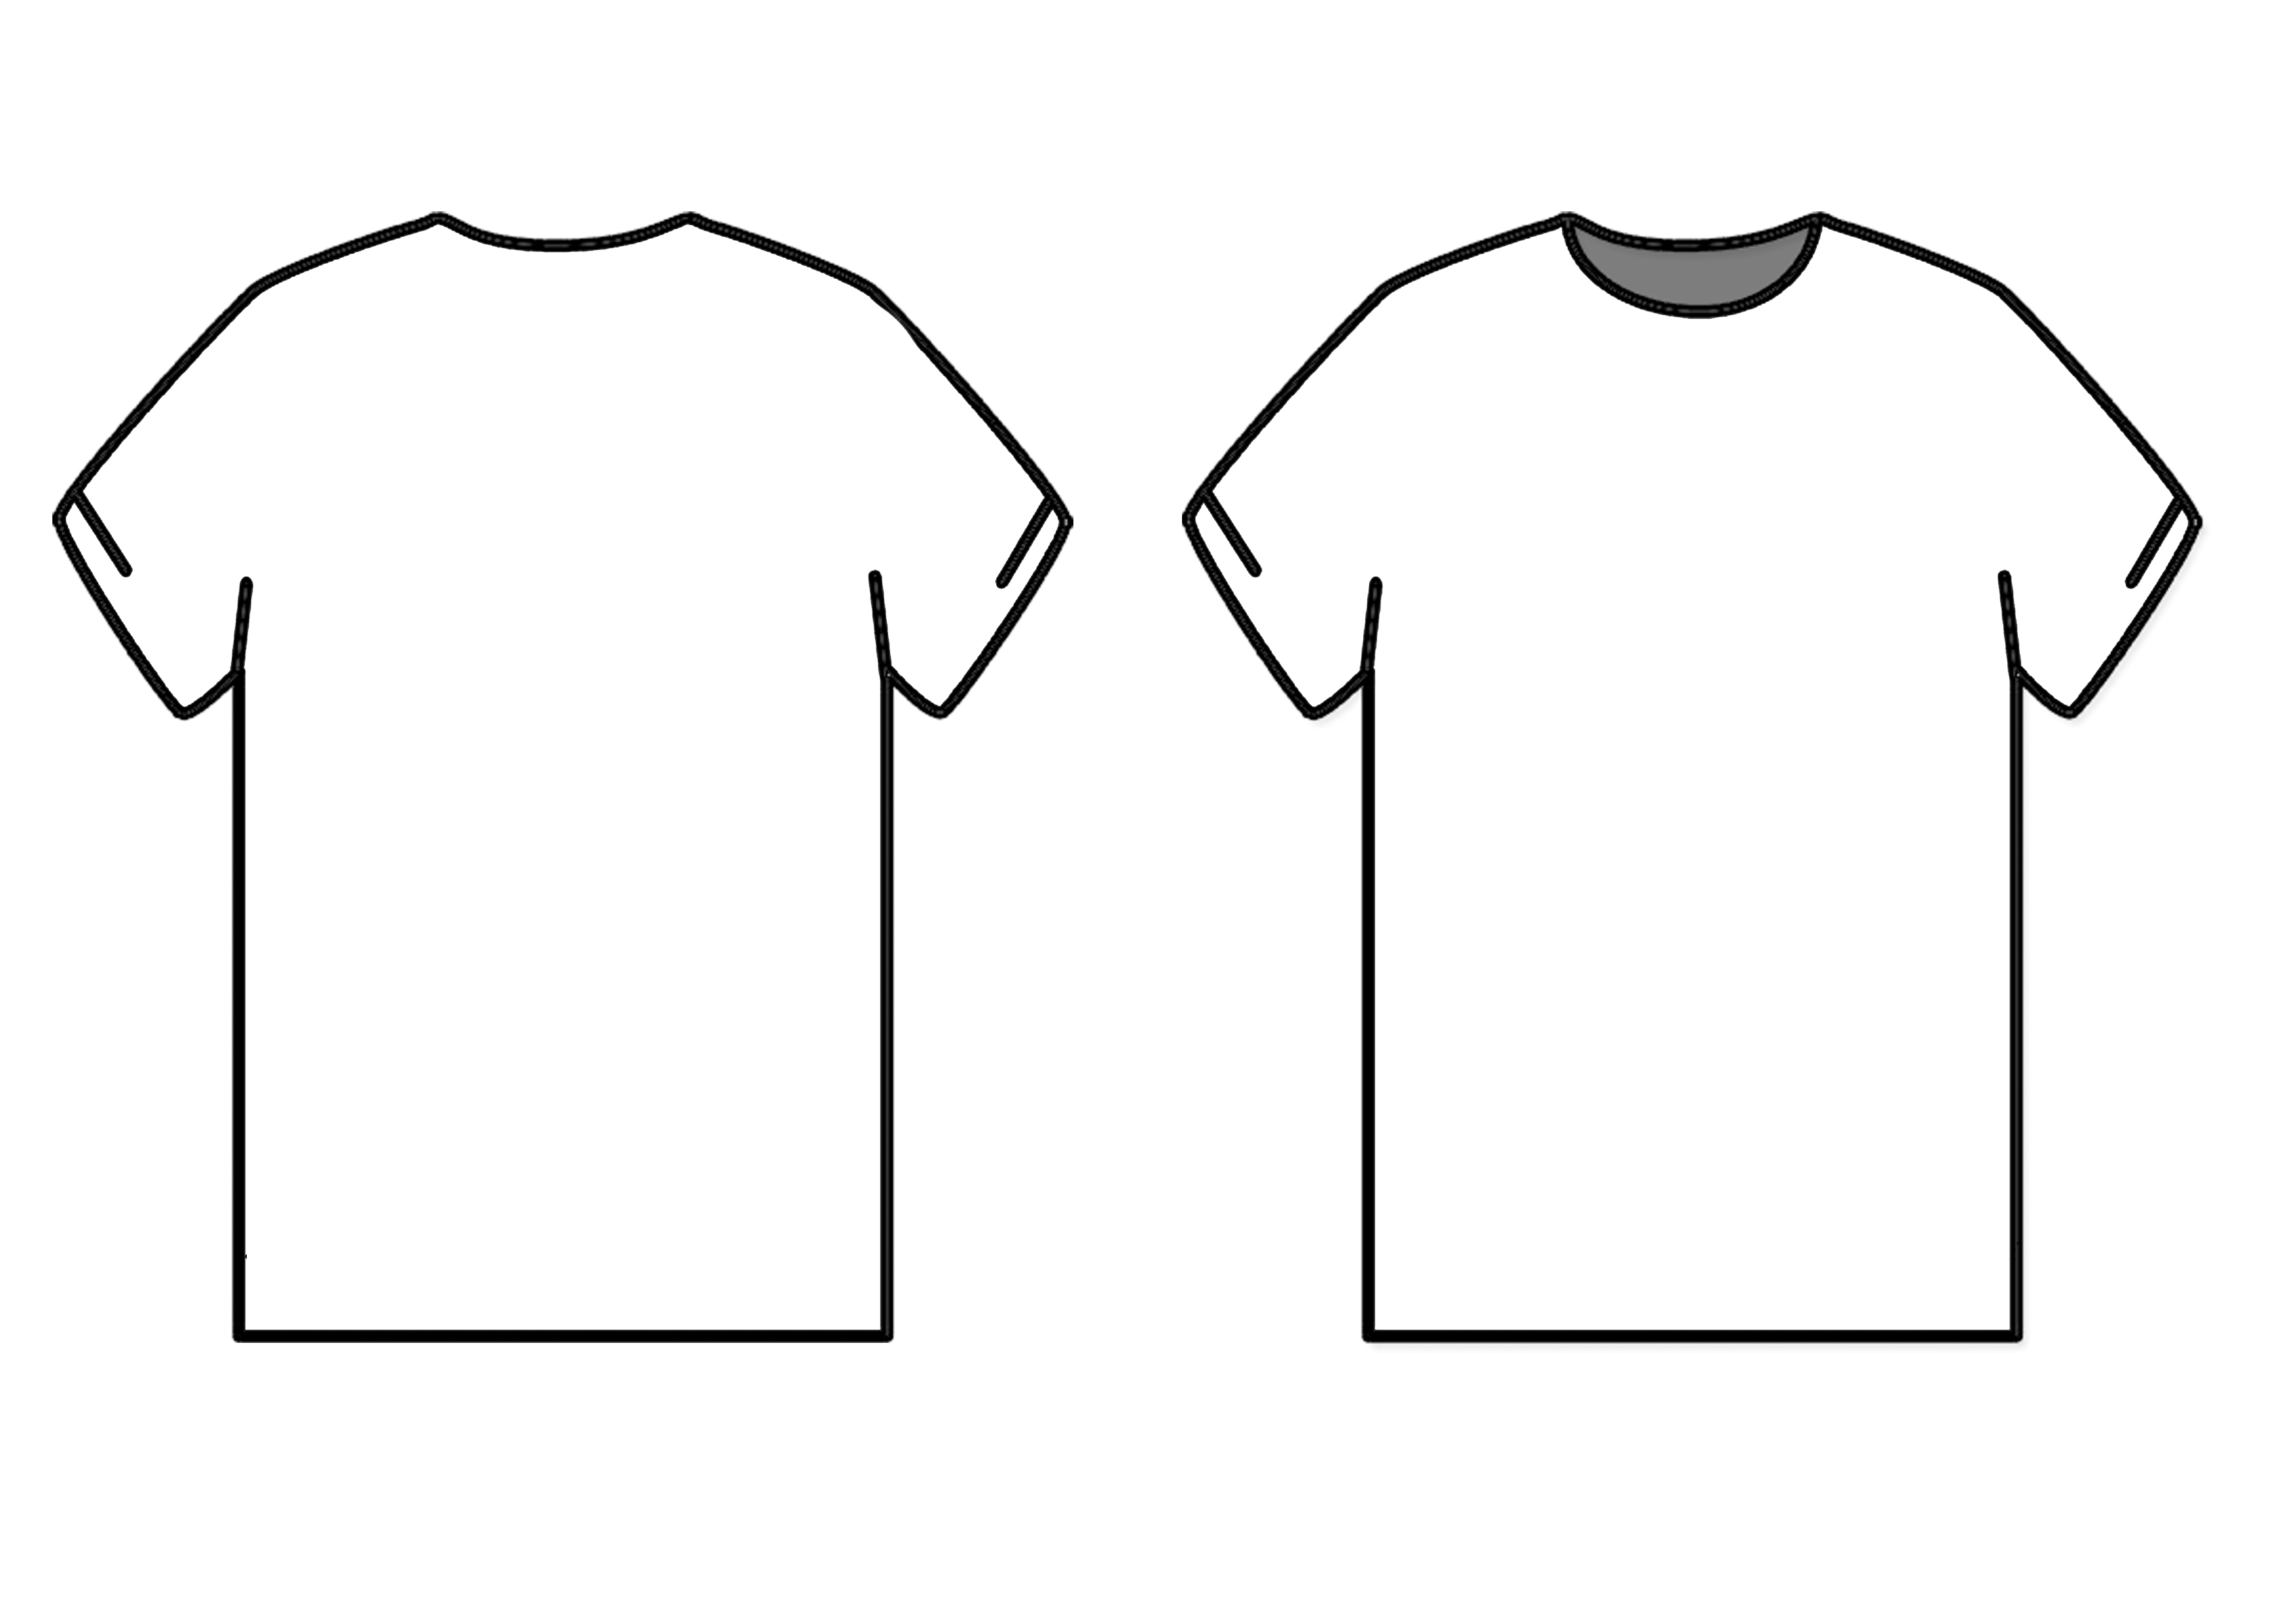 15-tee-shirt-template-for-photoshop-images-shirt-design-template